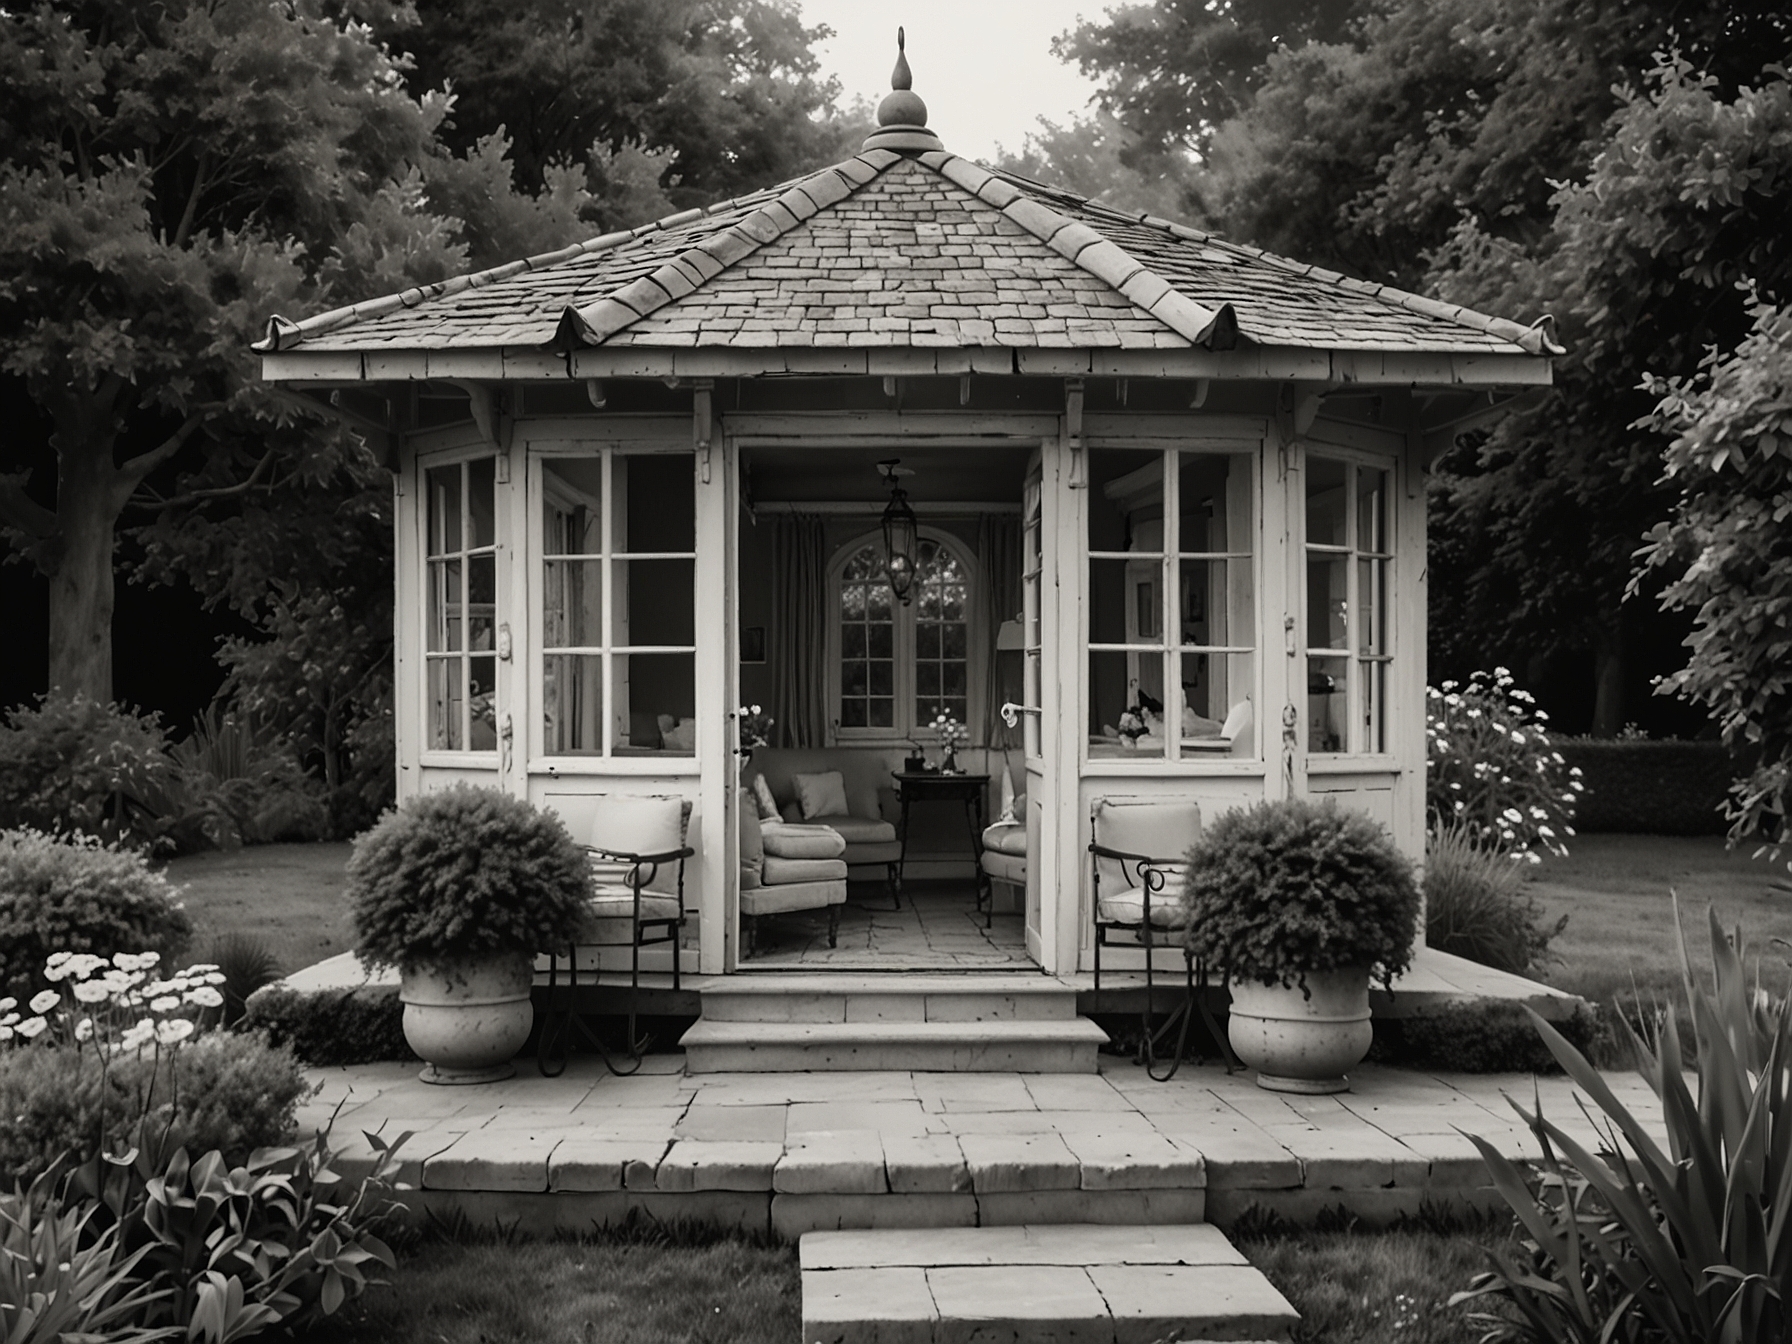 The secret summer house in the garden of the 'council house mansion', complete with stylish seating, a kitchenette, and a small bathroom, offering a perfect retreat for relaxation and entertaining.